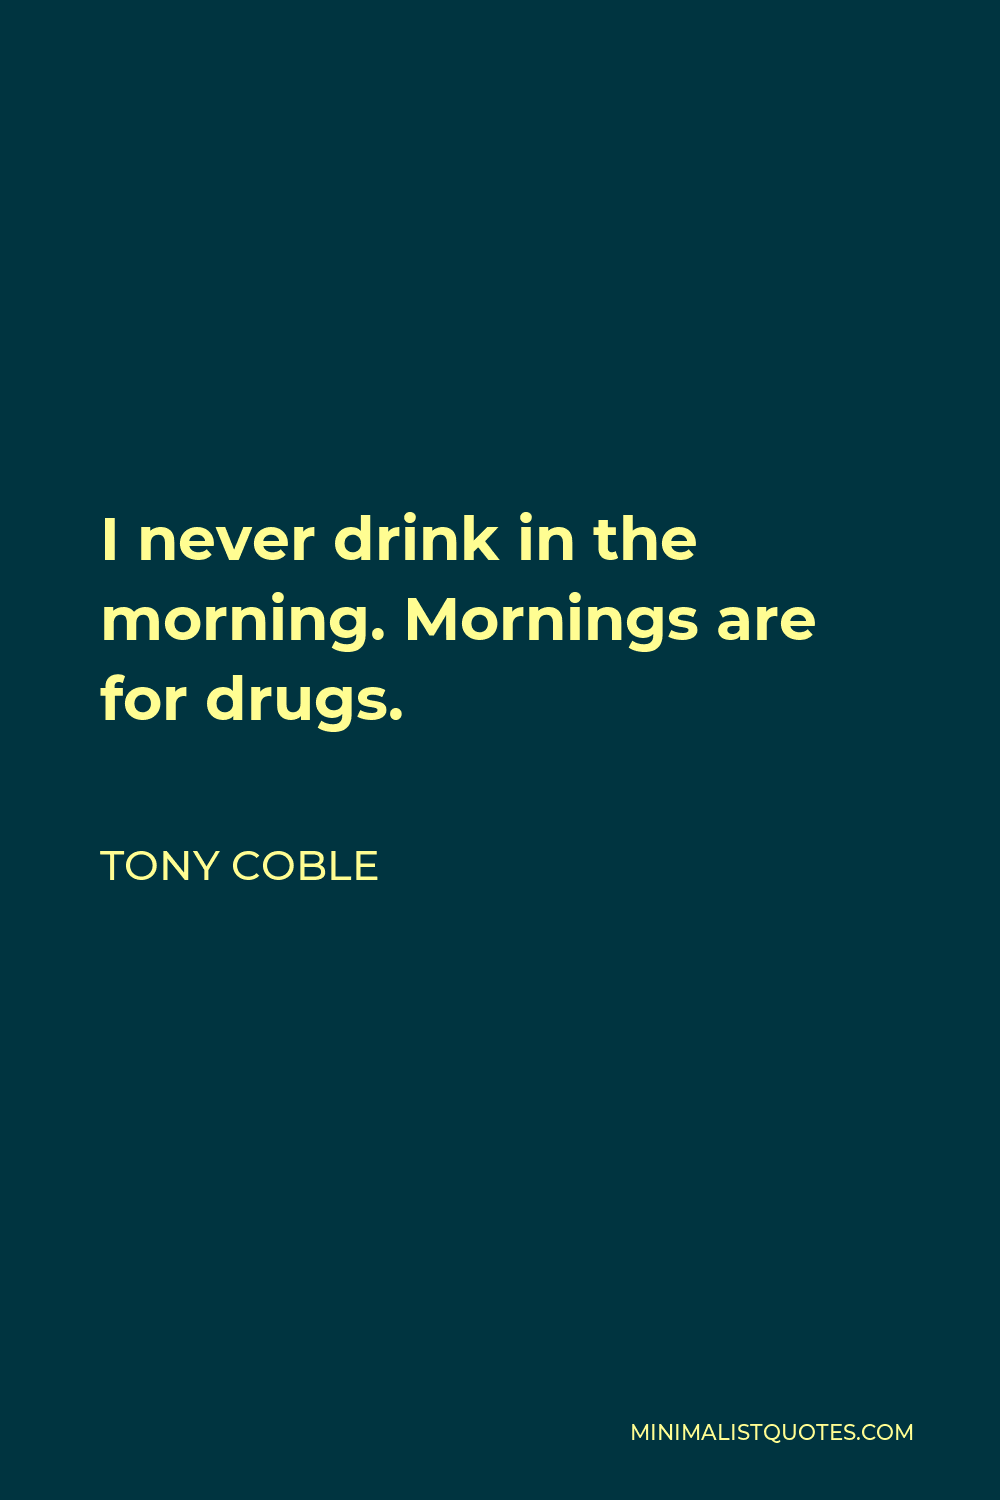 Tony Coble Quote - I never drink in the morning. Mornings are for drugs.